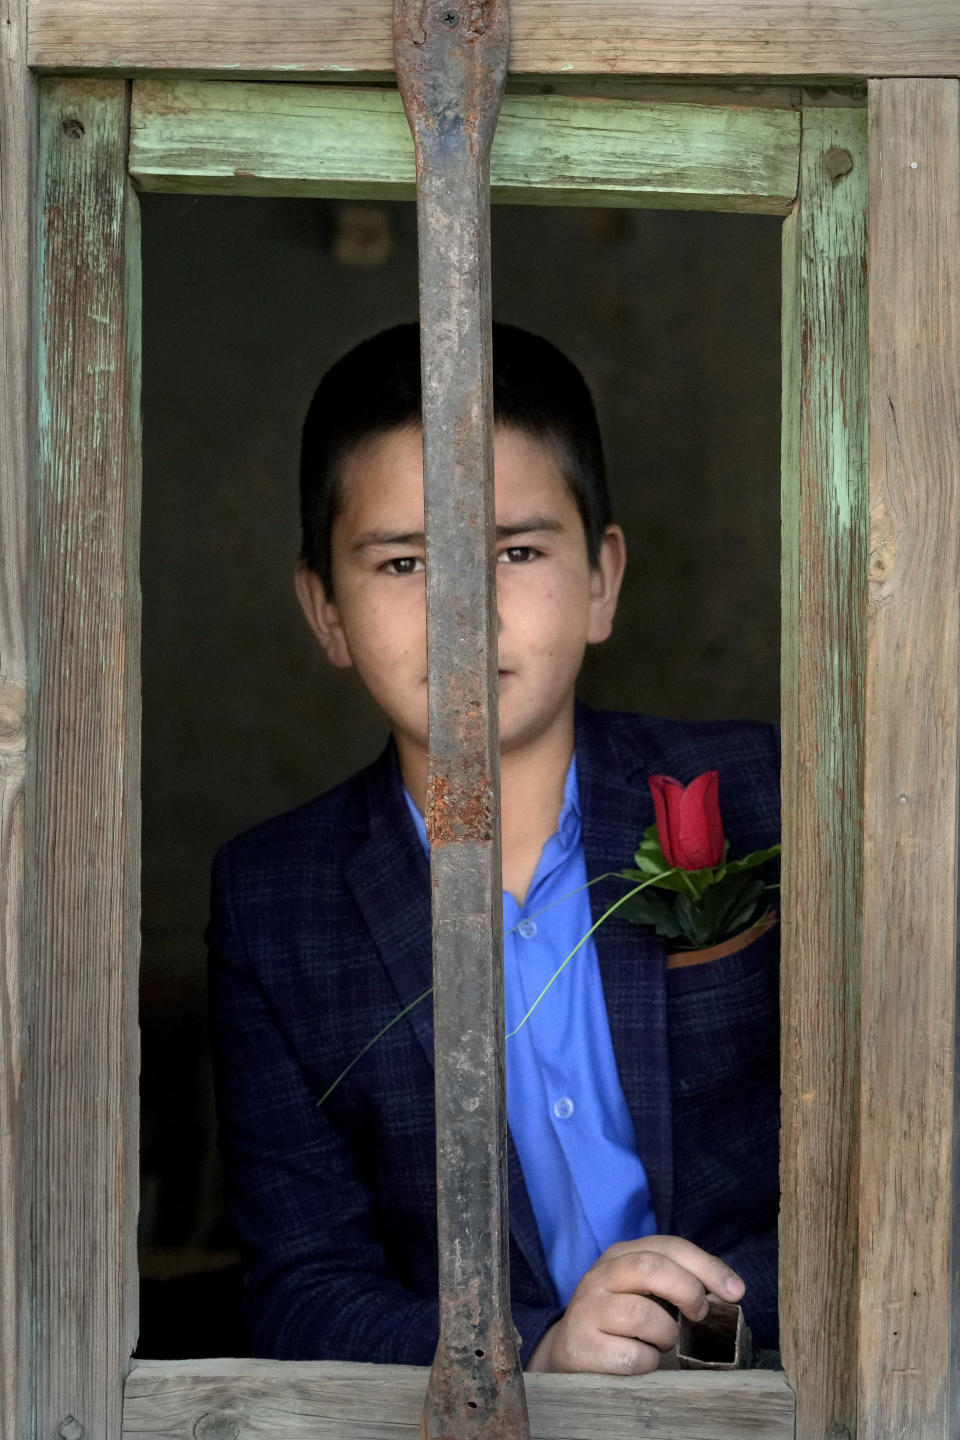 An Afghan student stands behind the classroom window after taking a rose on the first day of school after Tuesday's explosion in front of his school, in Kabul, Afghanistan, Saturday, April 23, 2022. On Saturday, the Abdul Rahim Shaheed School, which was among the IS-K targets in the Tuesday attacks, re-opened. The school's principal handed each student a pen and a flower as they began classes on Saturday. (AP Photo/Ebrahim Noroozi)